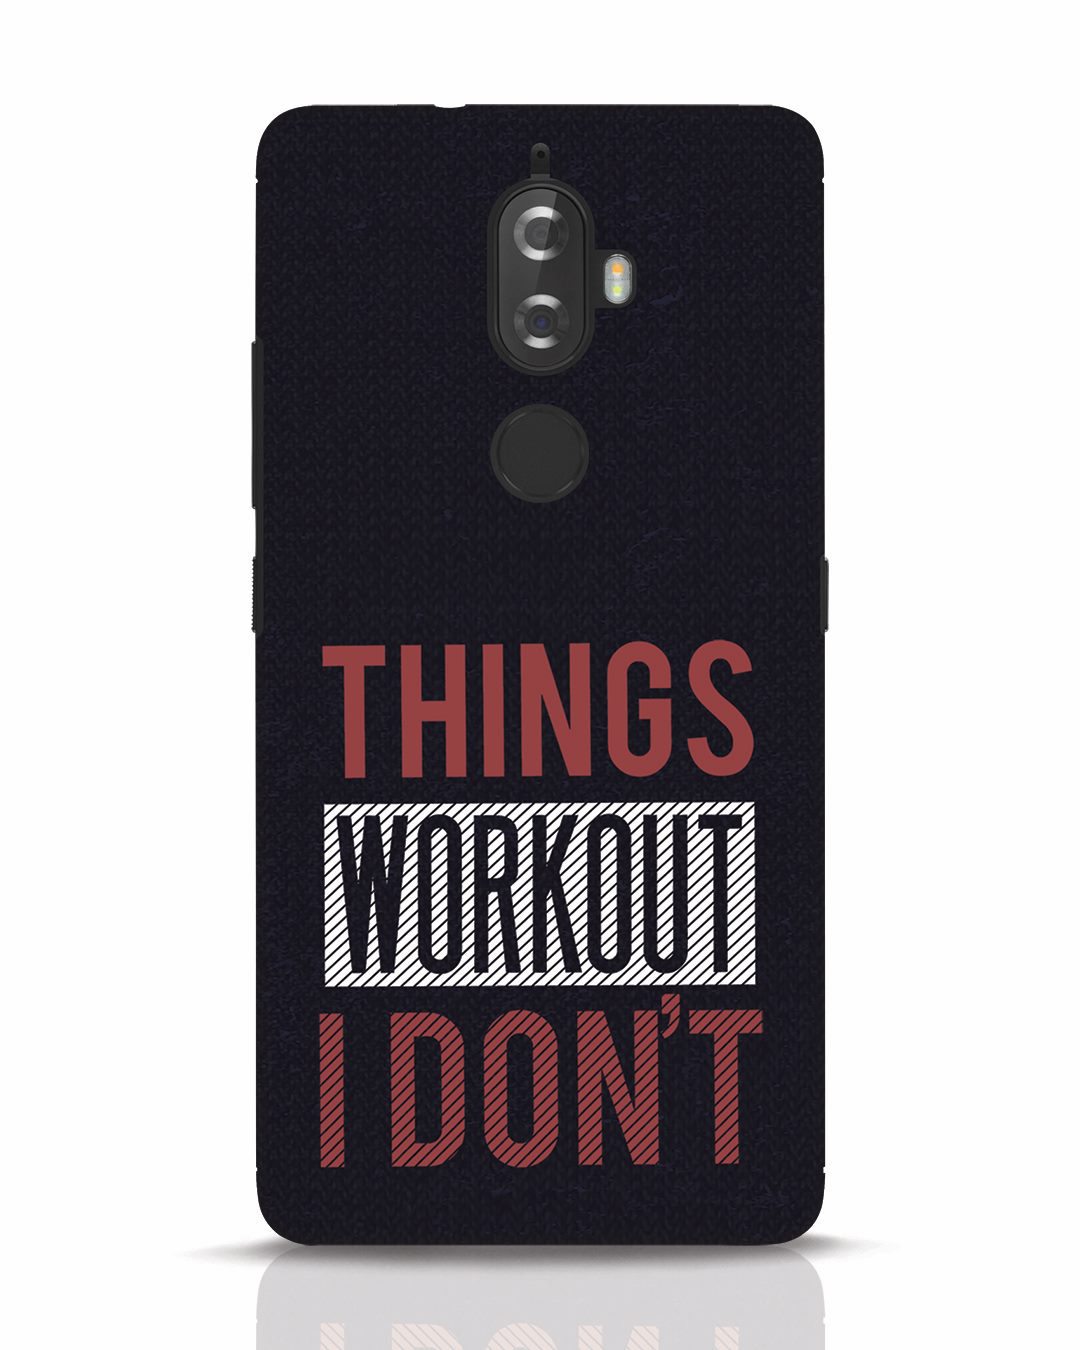 Things Workout Lenovo K8 Plus Mobile Cover Lenovo K8 Plus Mobile Covers Bewakoof.com